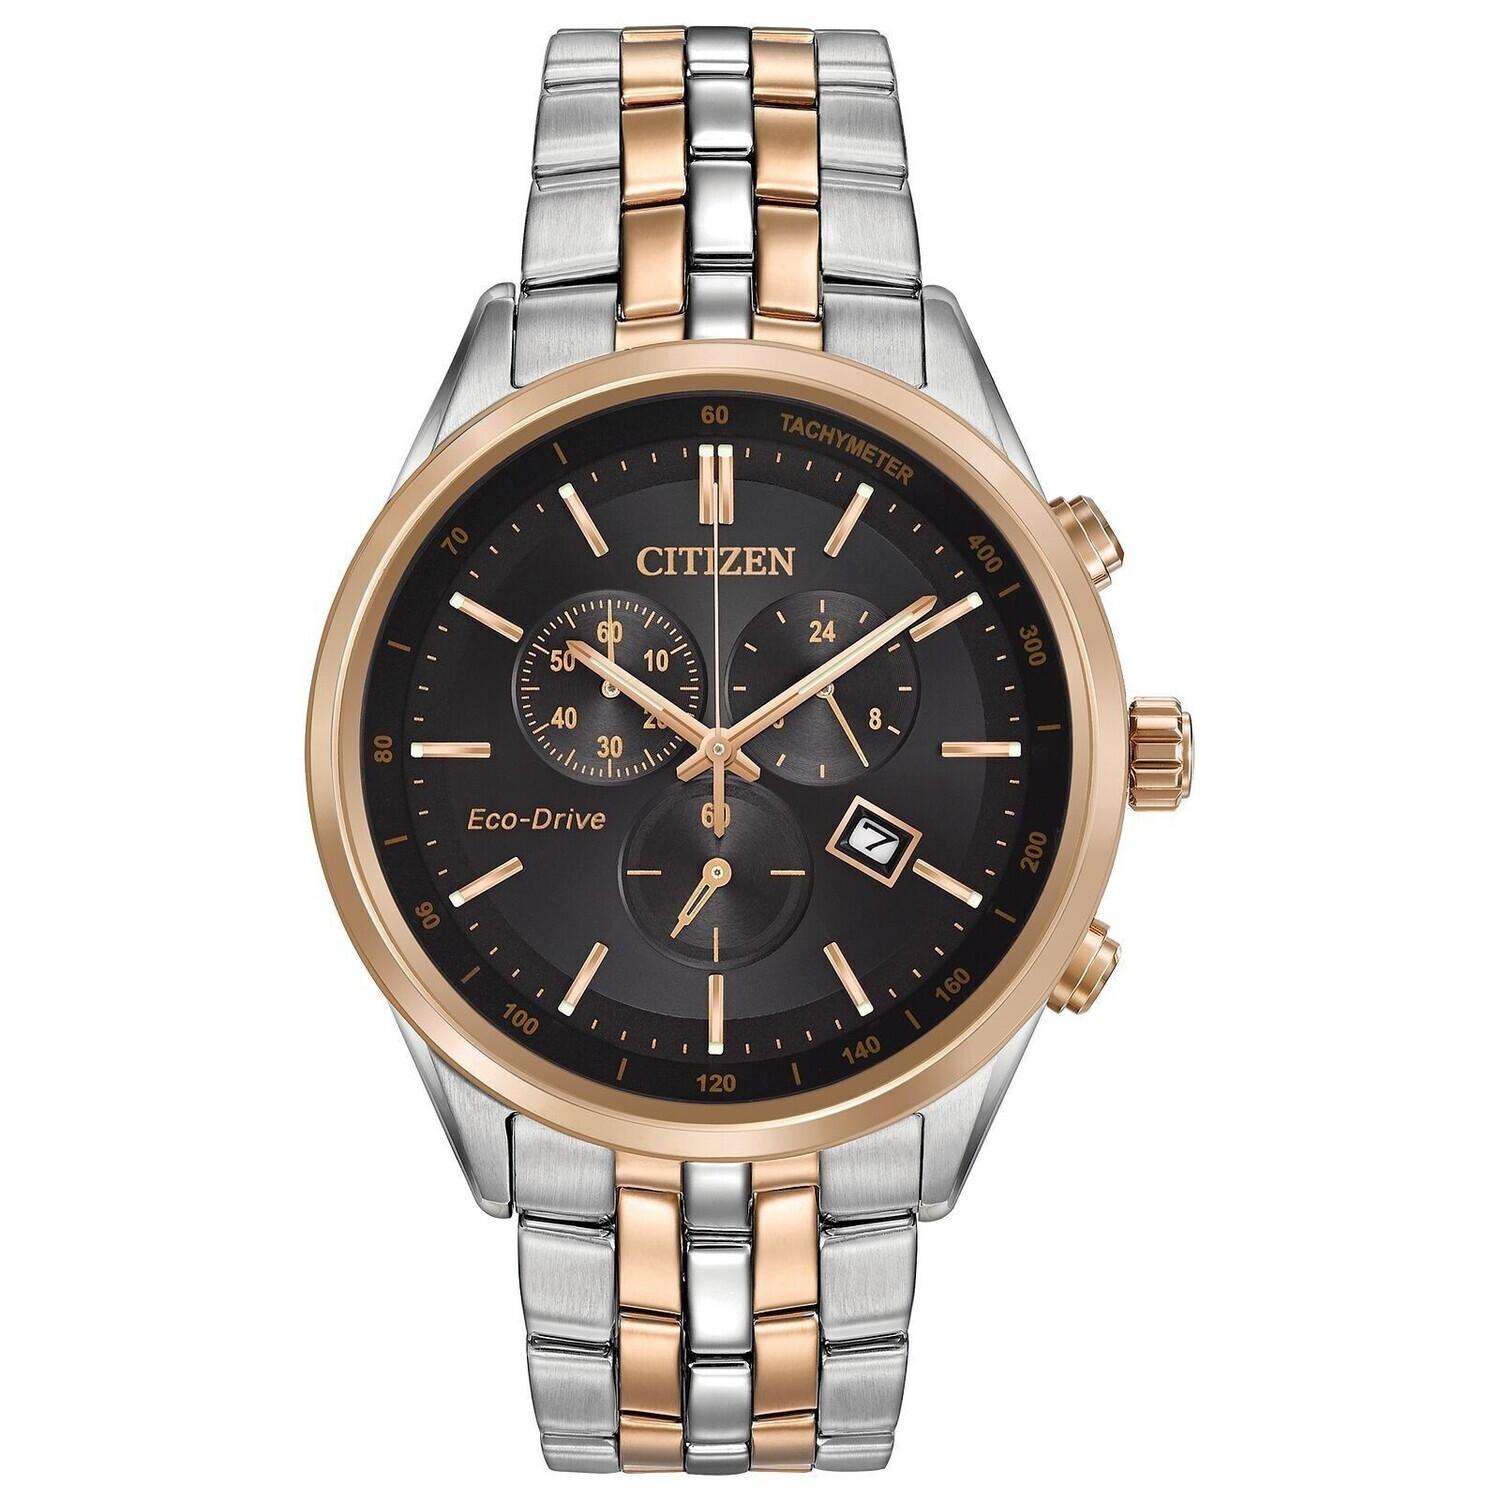 Citizen Eco-Drive Corso AT2146-59E 42mm Sapphire crystal sport men's watch 100m WR stainless steel bracelet two-tone Eco-Drive movement (solar or light powered)